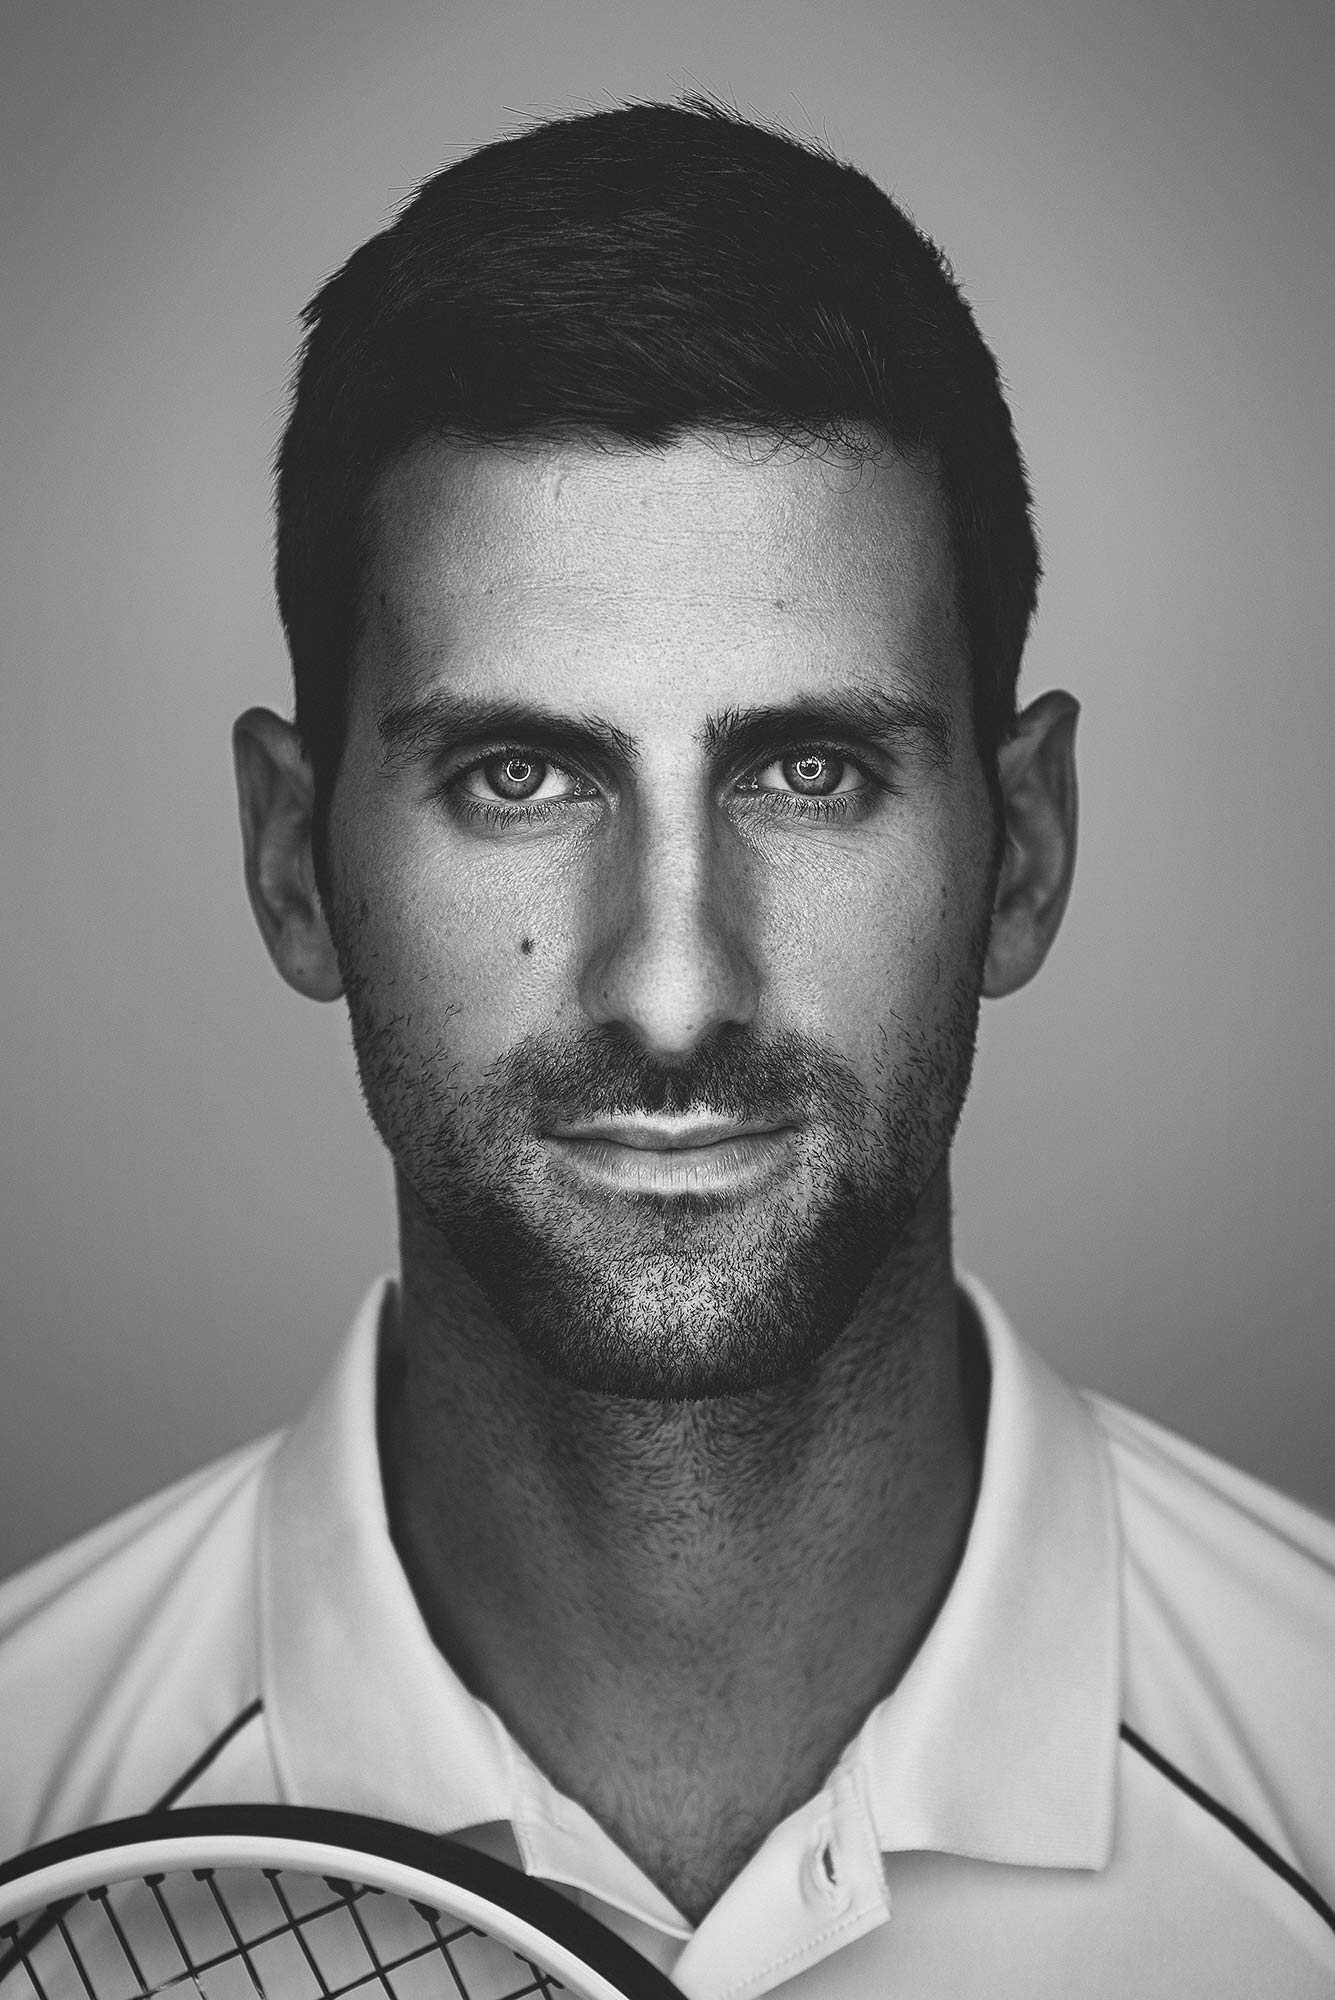 Serbian professional tennis player and world number one Novak Djokovic photographed in black and white in studio